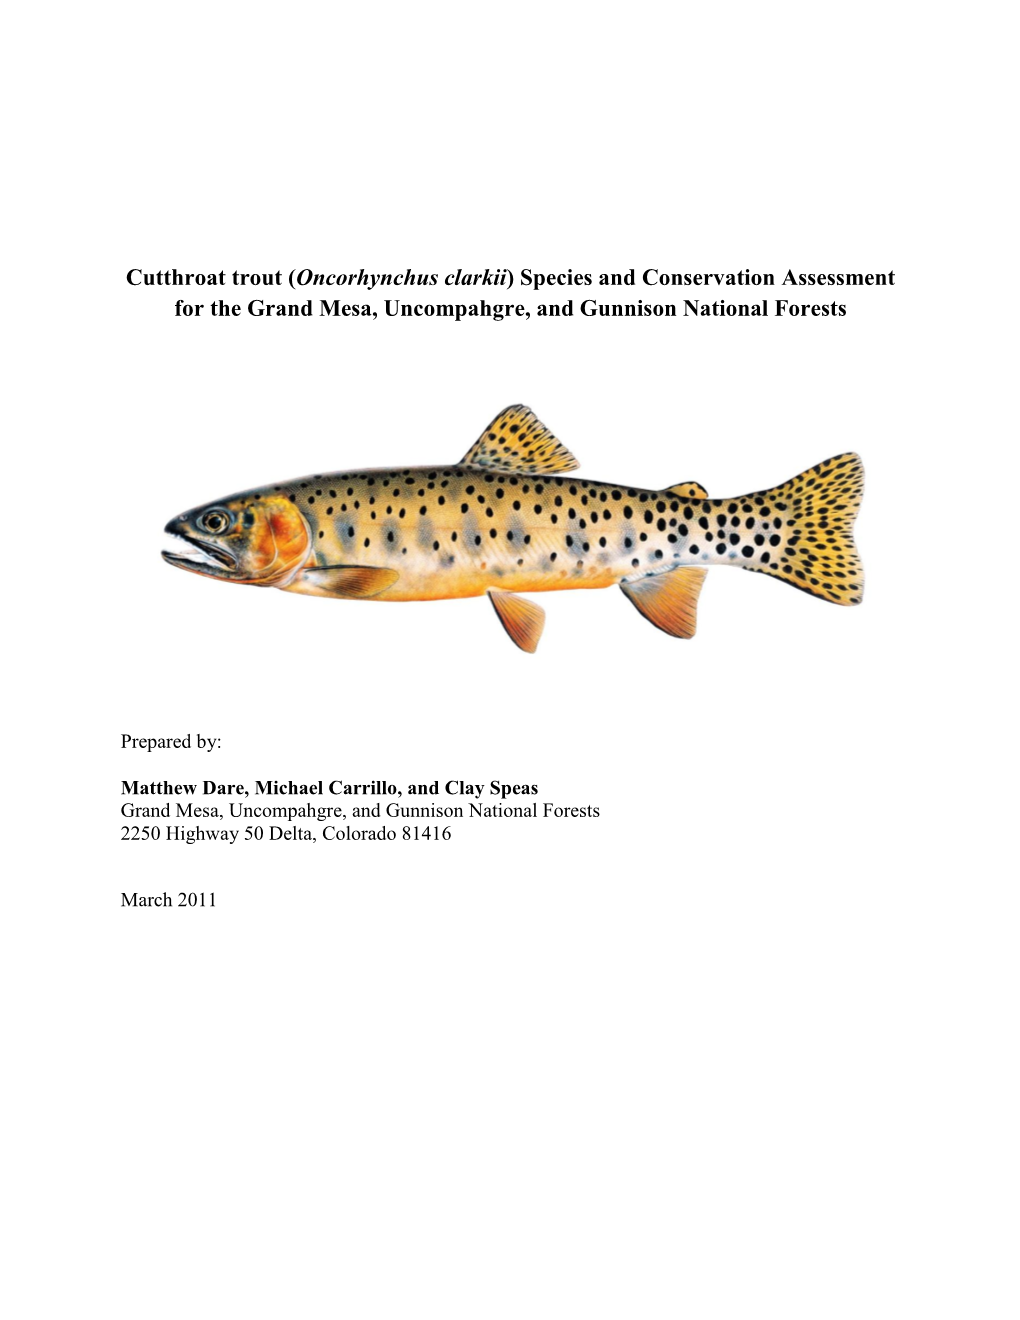 Cutthroat Trout (Oncorhynchus Clarkii) Species and Conservation Assessment for the Grand Mesa, Uncompahgre, and Gunnison National Forests